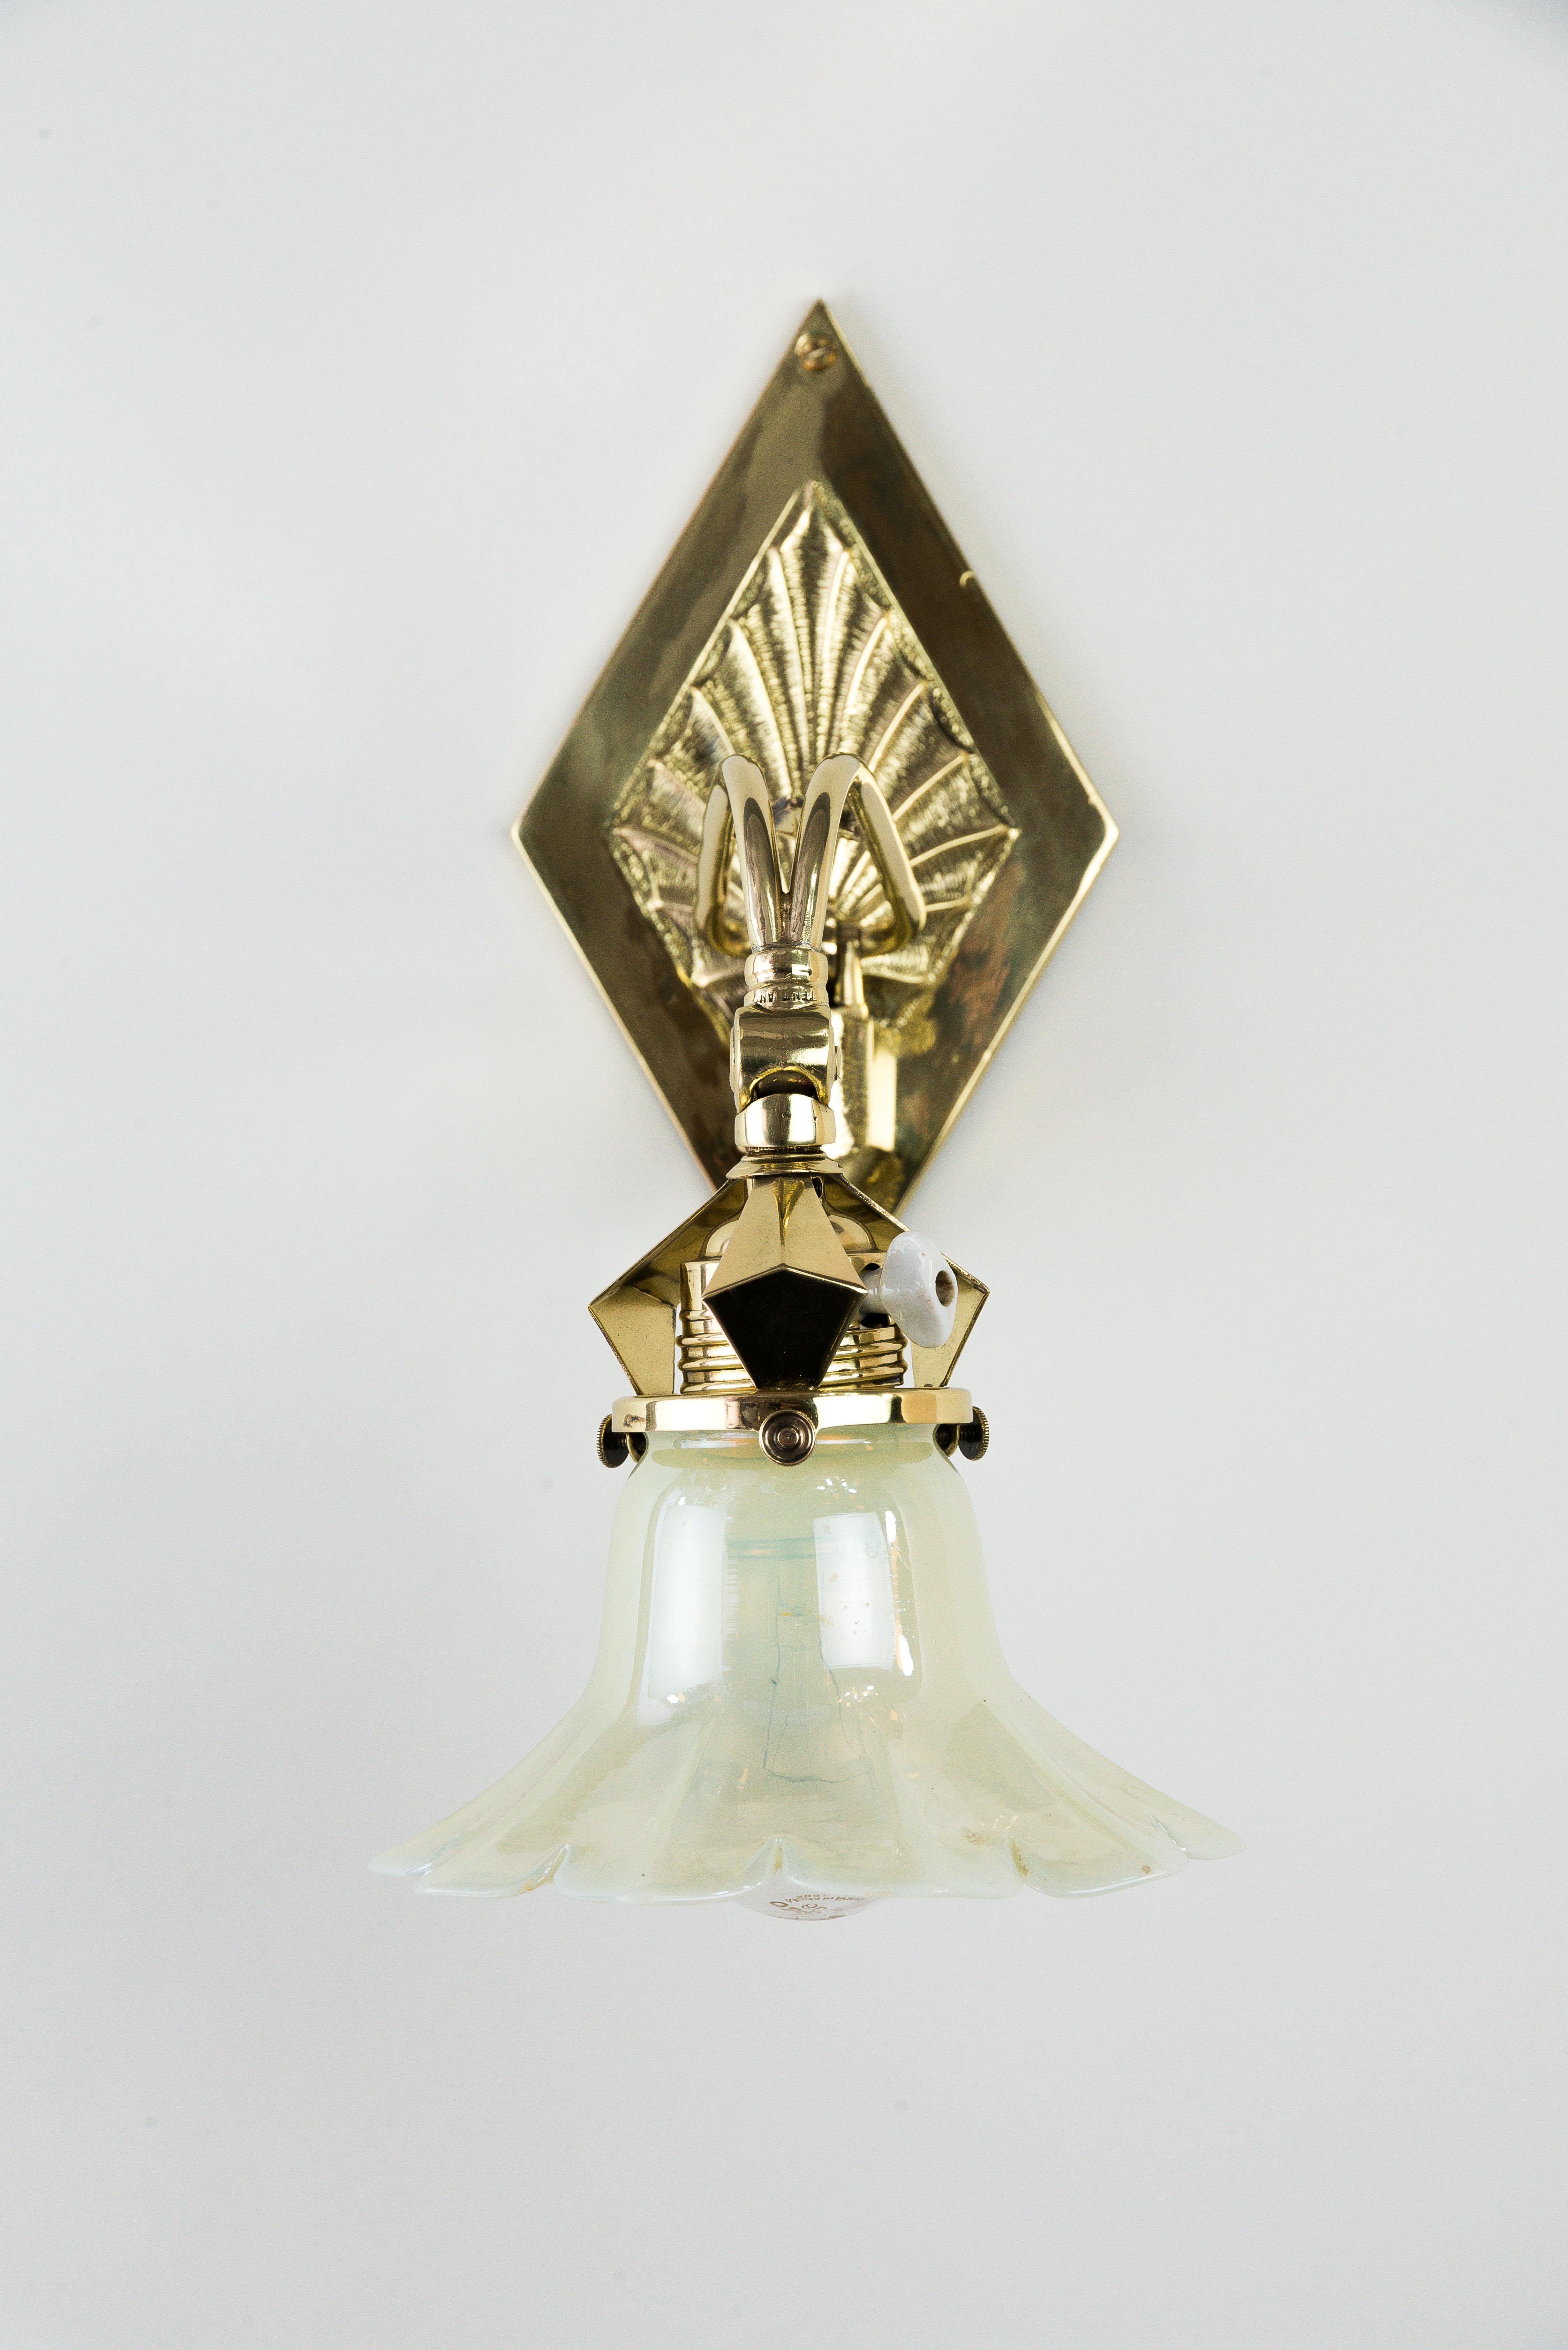 Polished Adjustable Art Deco Wall Lamp circa 1920s with Opaline Glass Shade